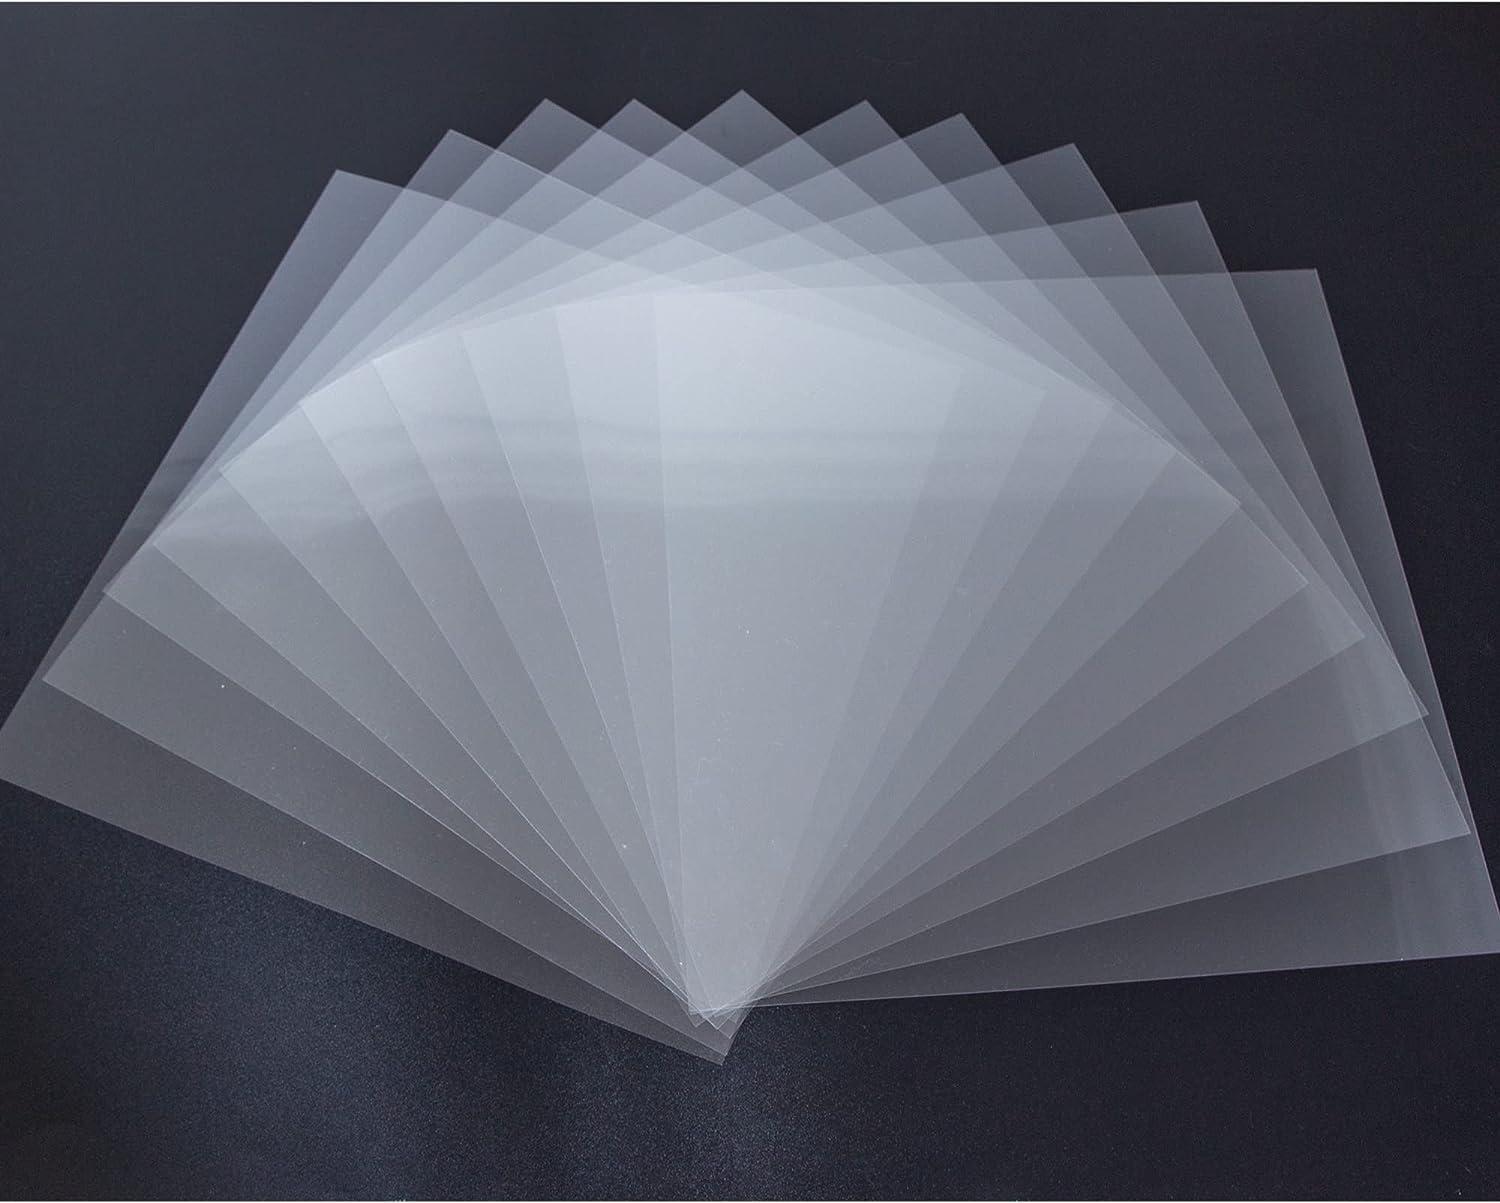 Acetate-like Plastic Sheets Clear Transparencies for Overhead Projectors,  Stencils, Cricut, Crafts, Shaker Cards 7 Mil Thick 